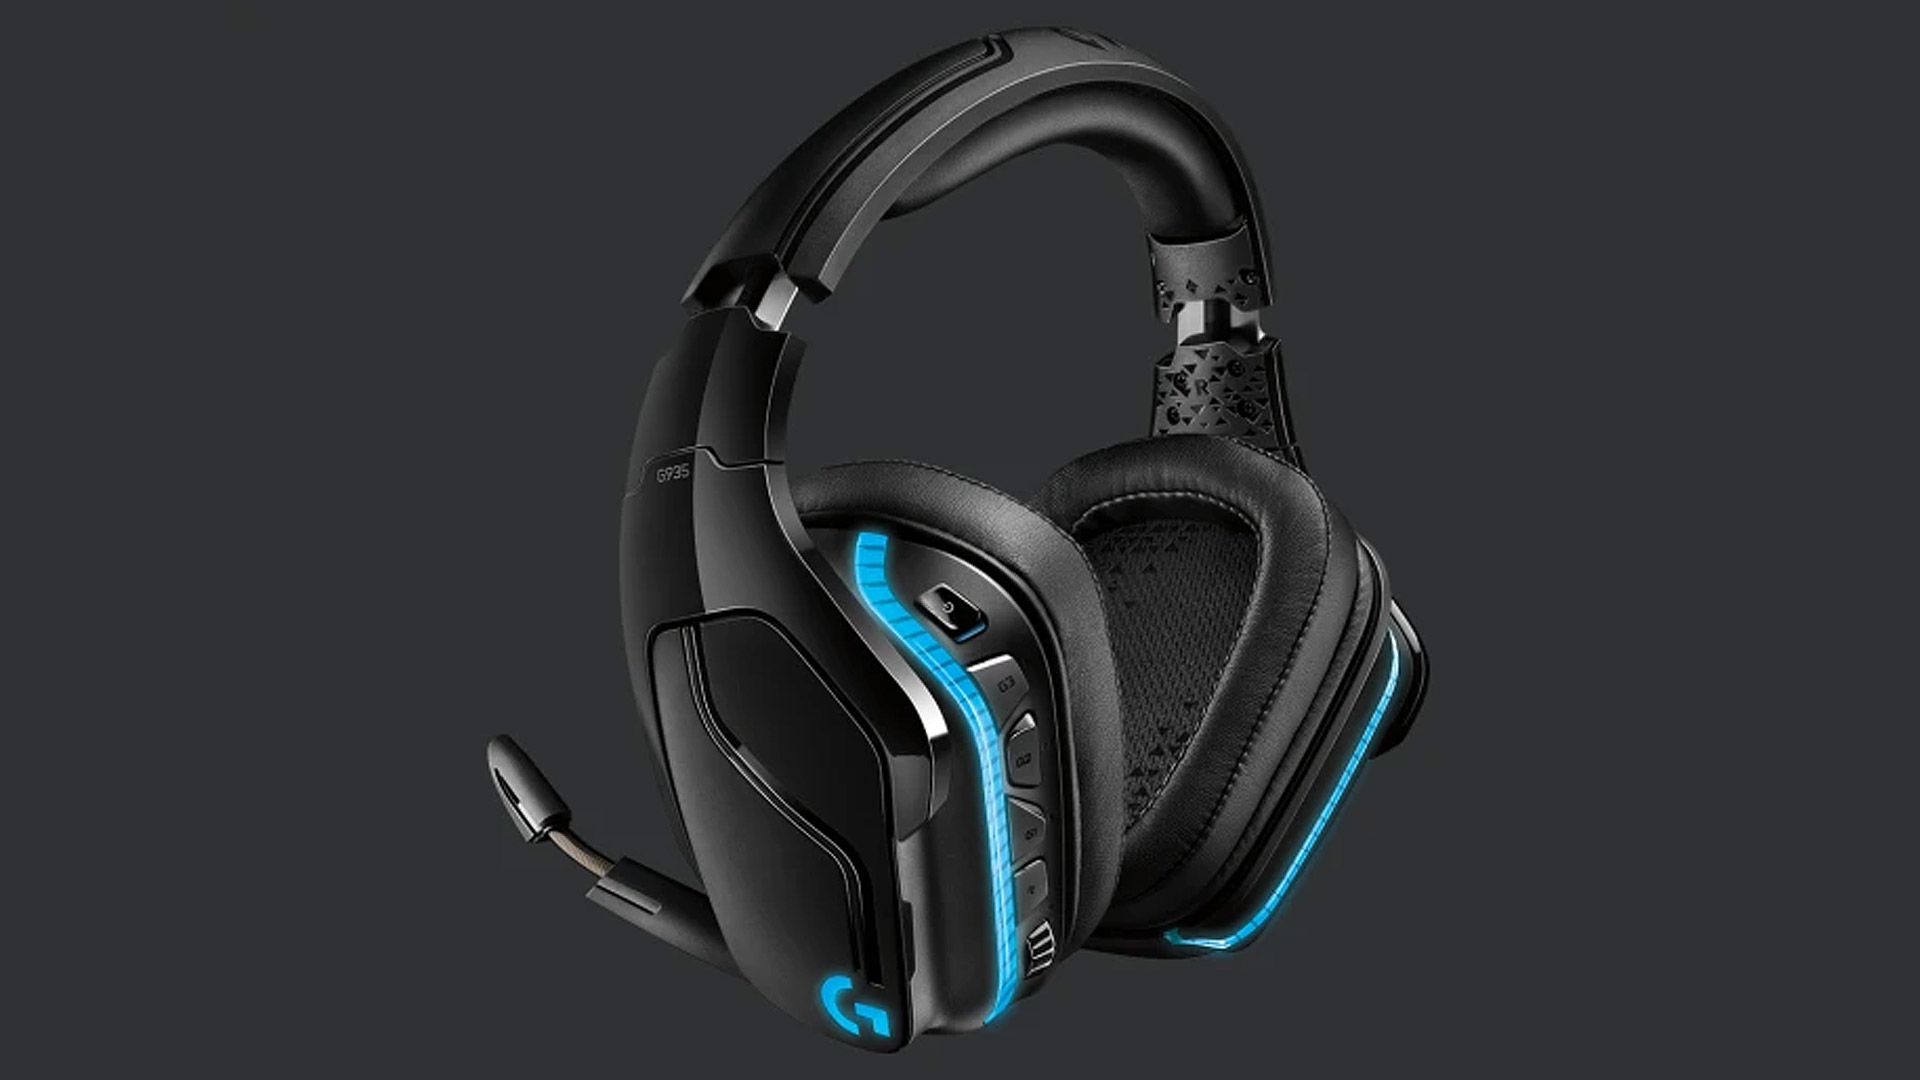 vasthouden Gewoon overlopen Lenen Deal of the week: save up to 31% on this Logitech G935 wireless headset |  The Loadout